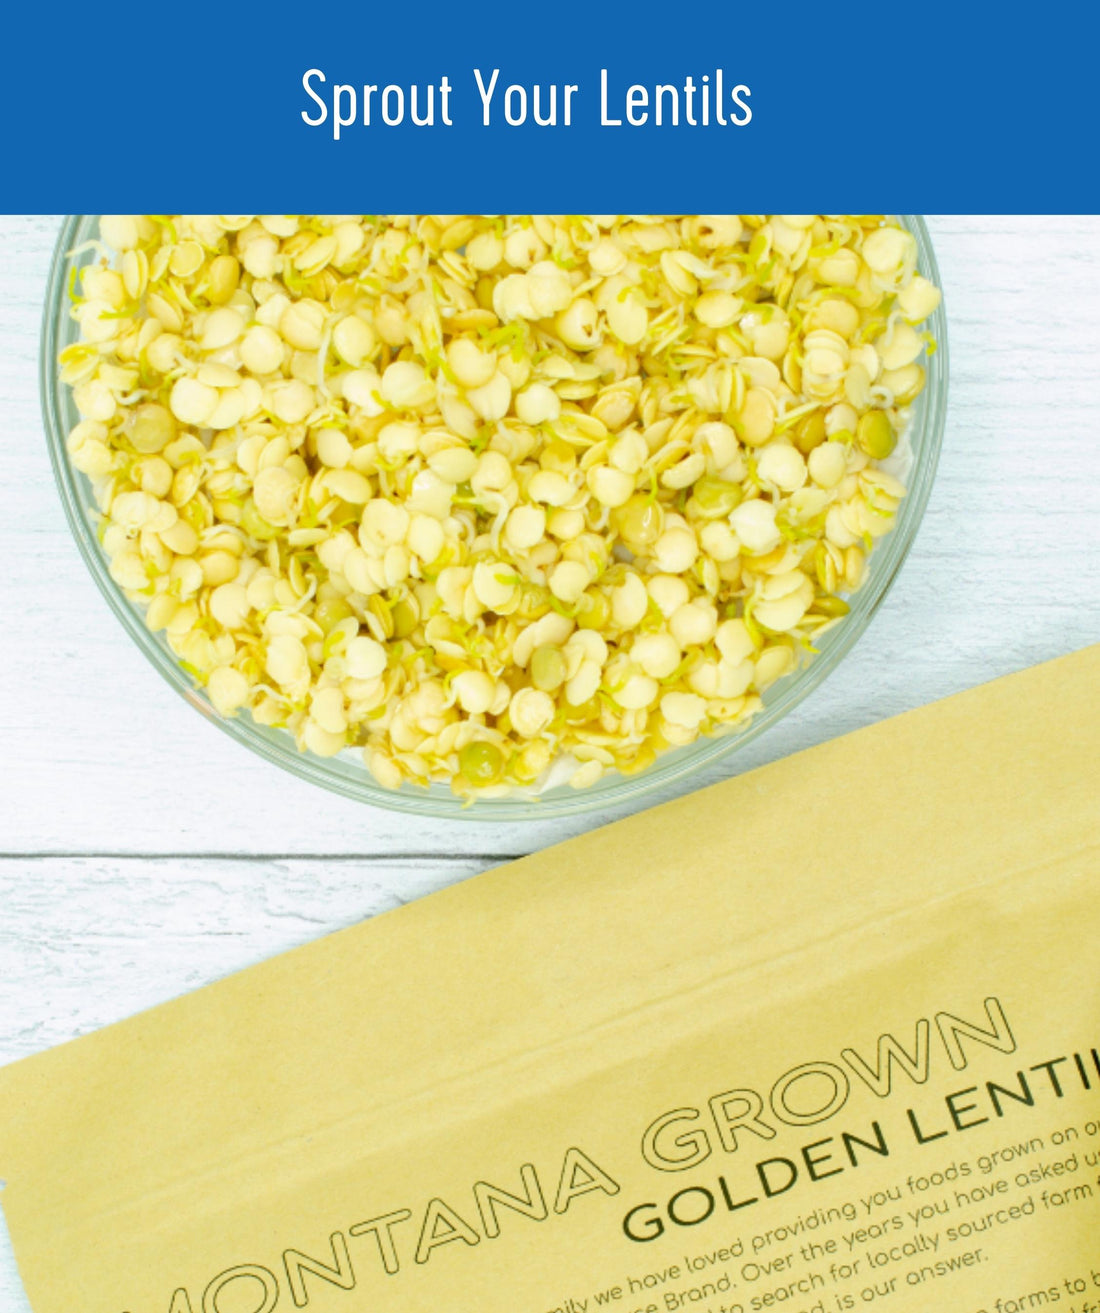 How to Sprout Idaho Grown Golden Lentils